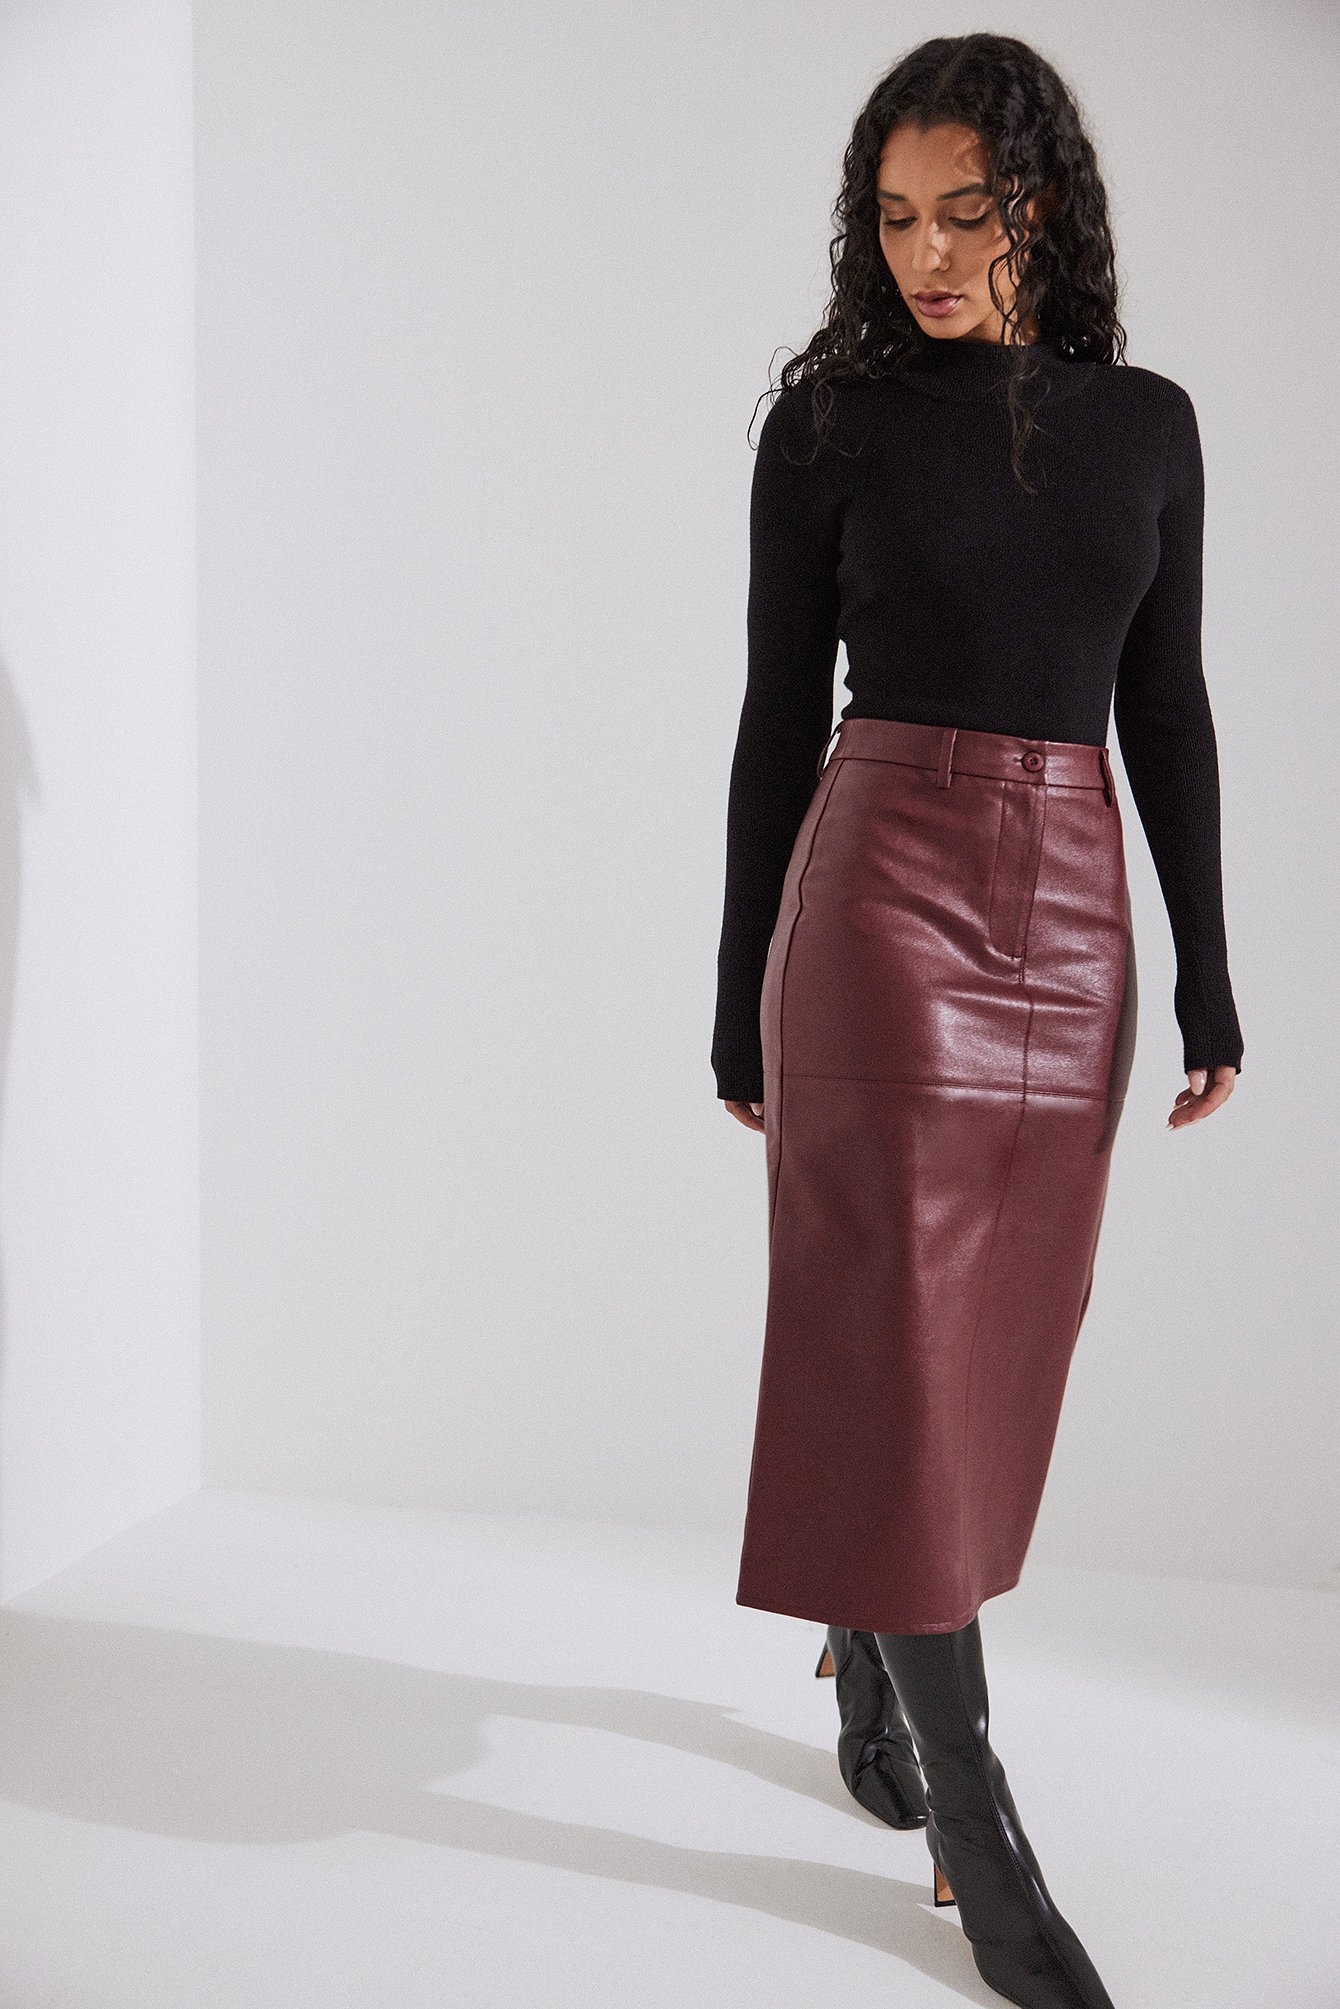 Vintage Green Leather Skirt Selected by Cherry | Free People